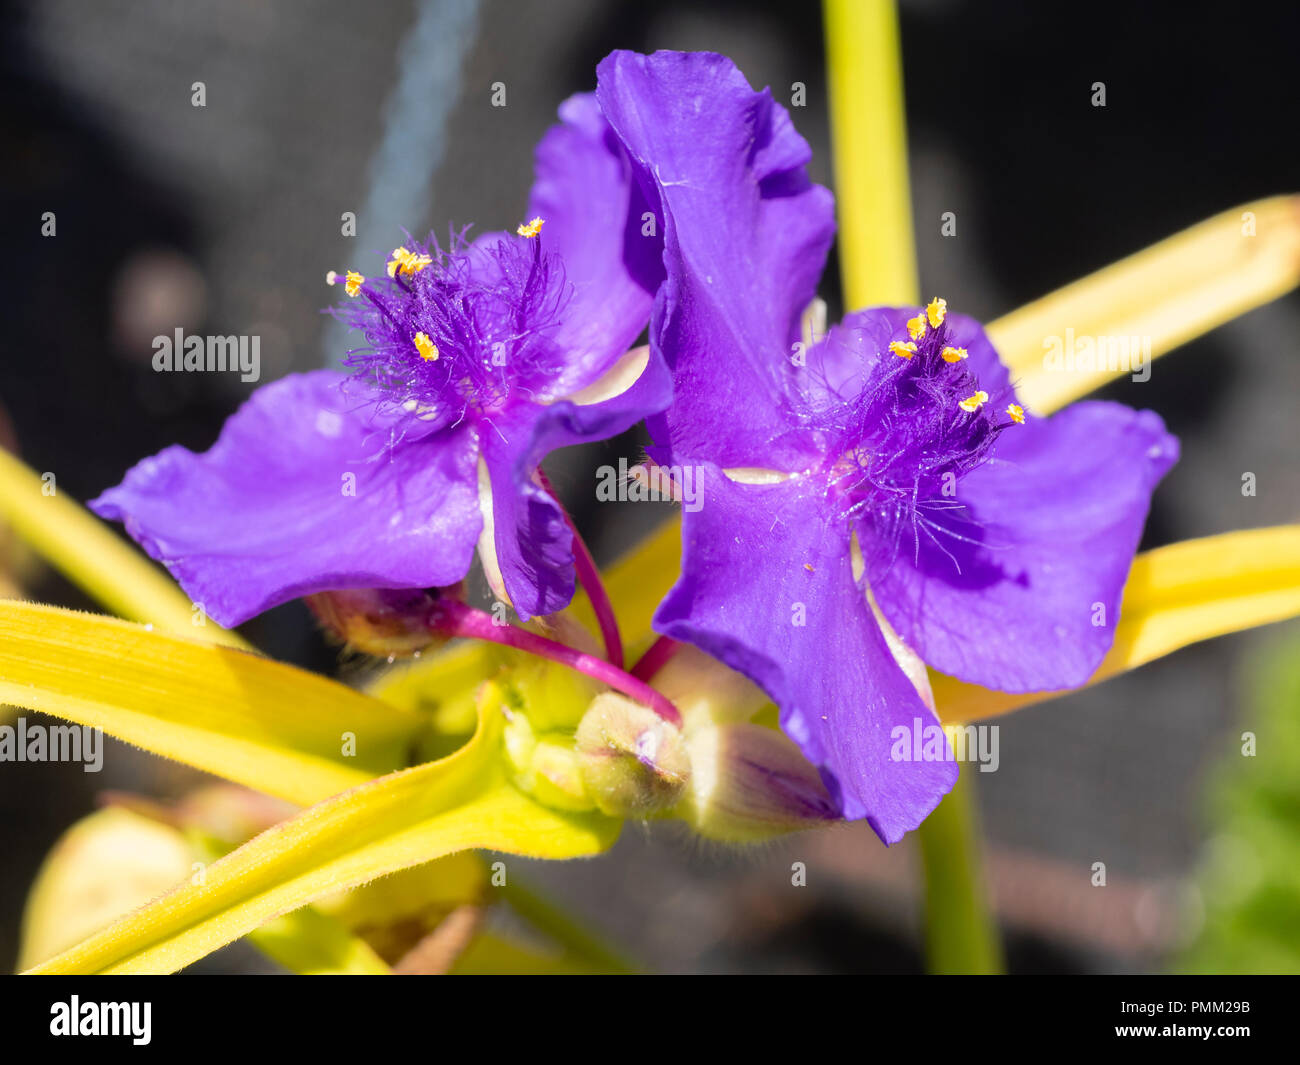 Narrow golden foliage adorned with purple-blue flowers of the hardy perennial spiderwort, Tradescantia andersoniana 'Blue and Gold' Stock Photo